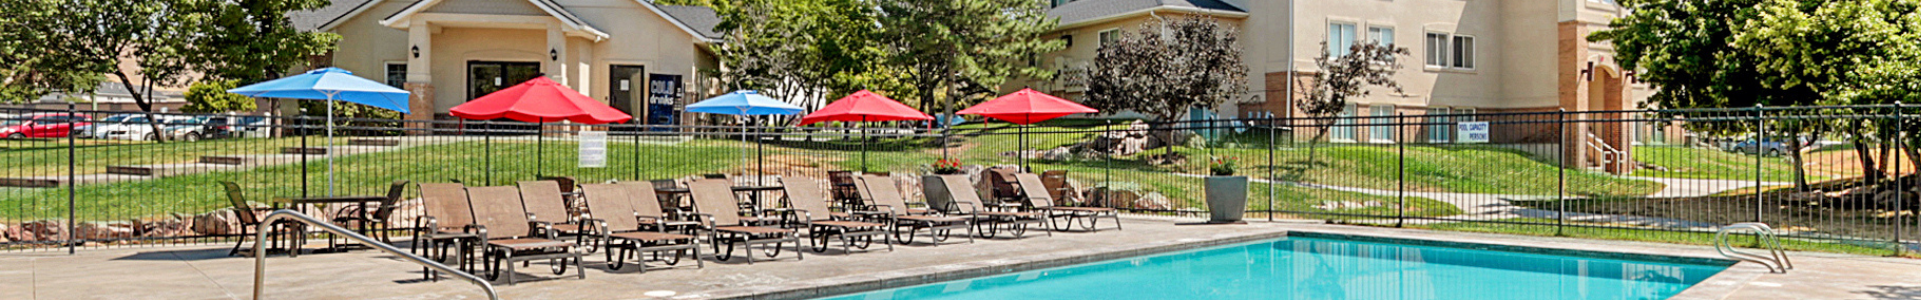 Pool with umbrella-covered lounge chairs